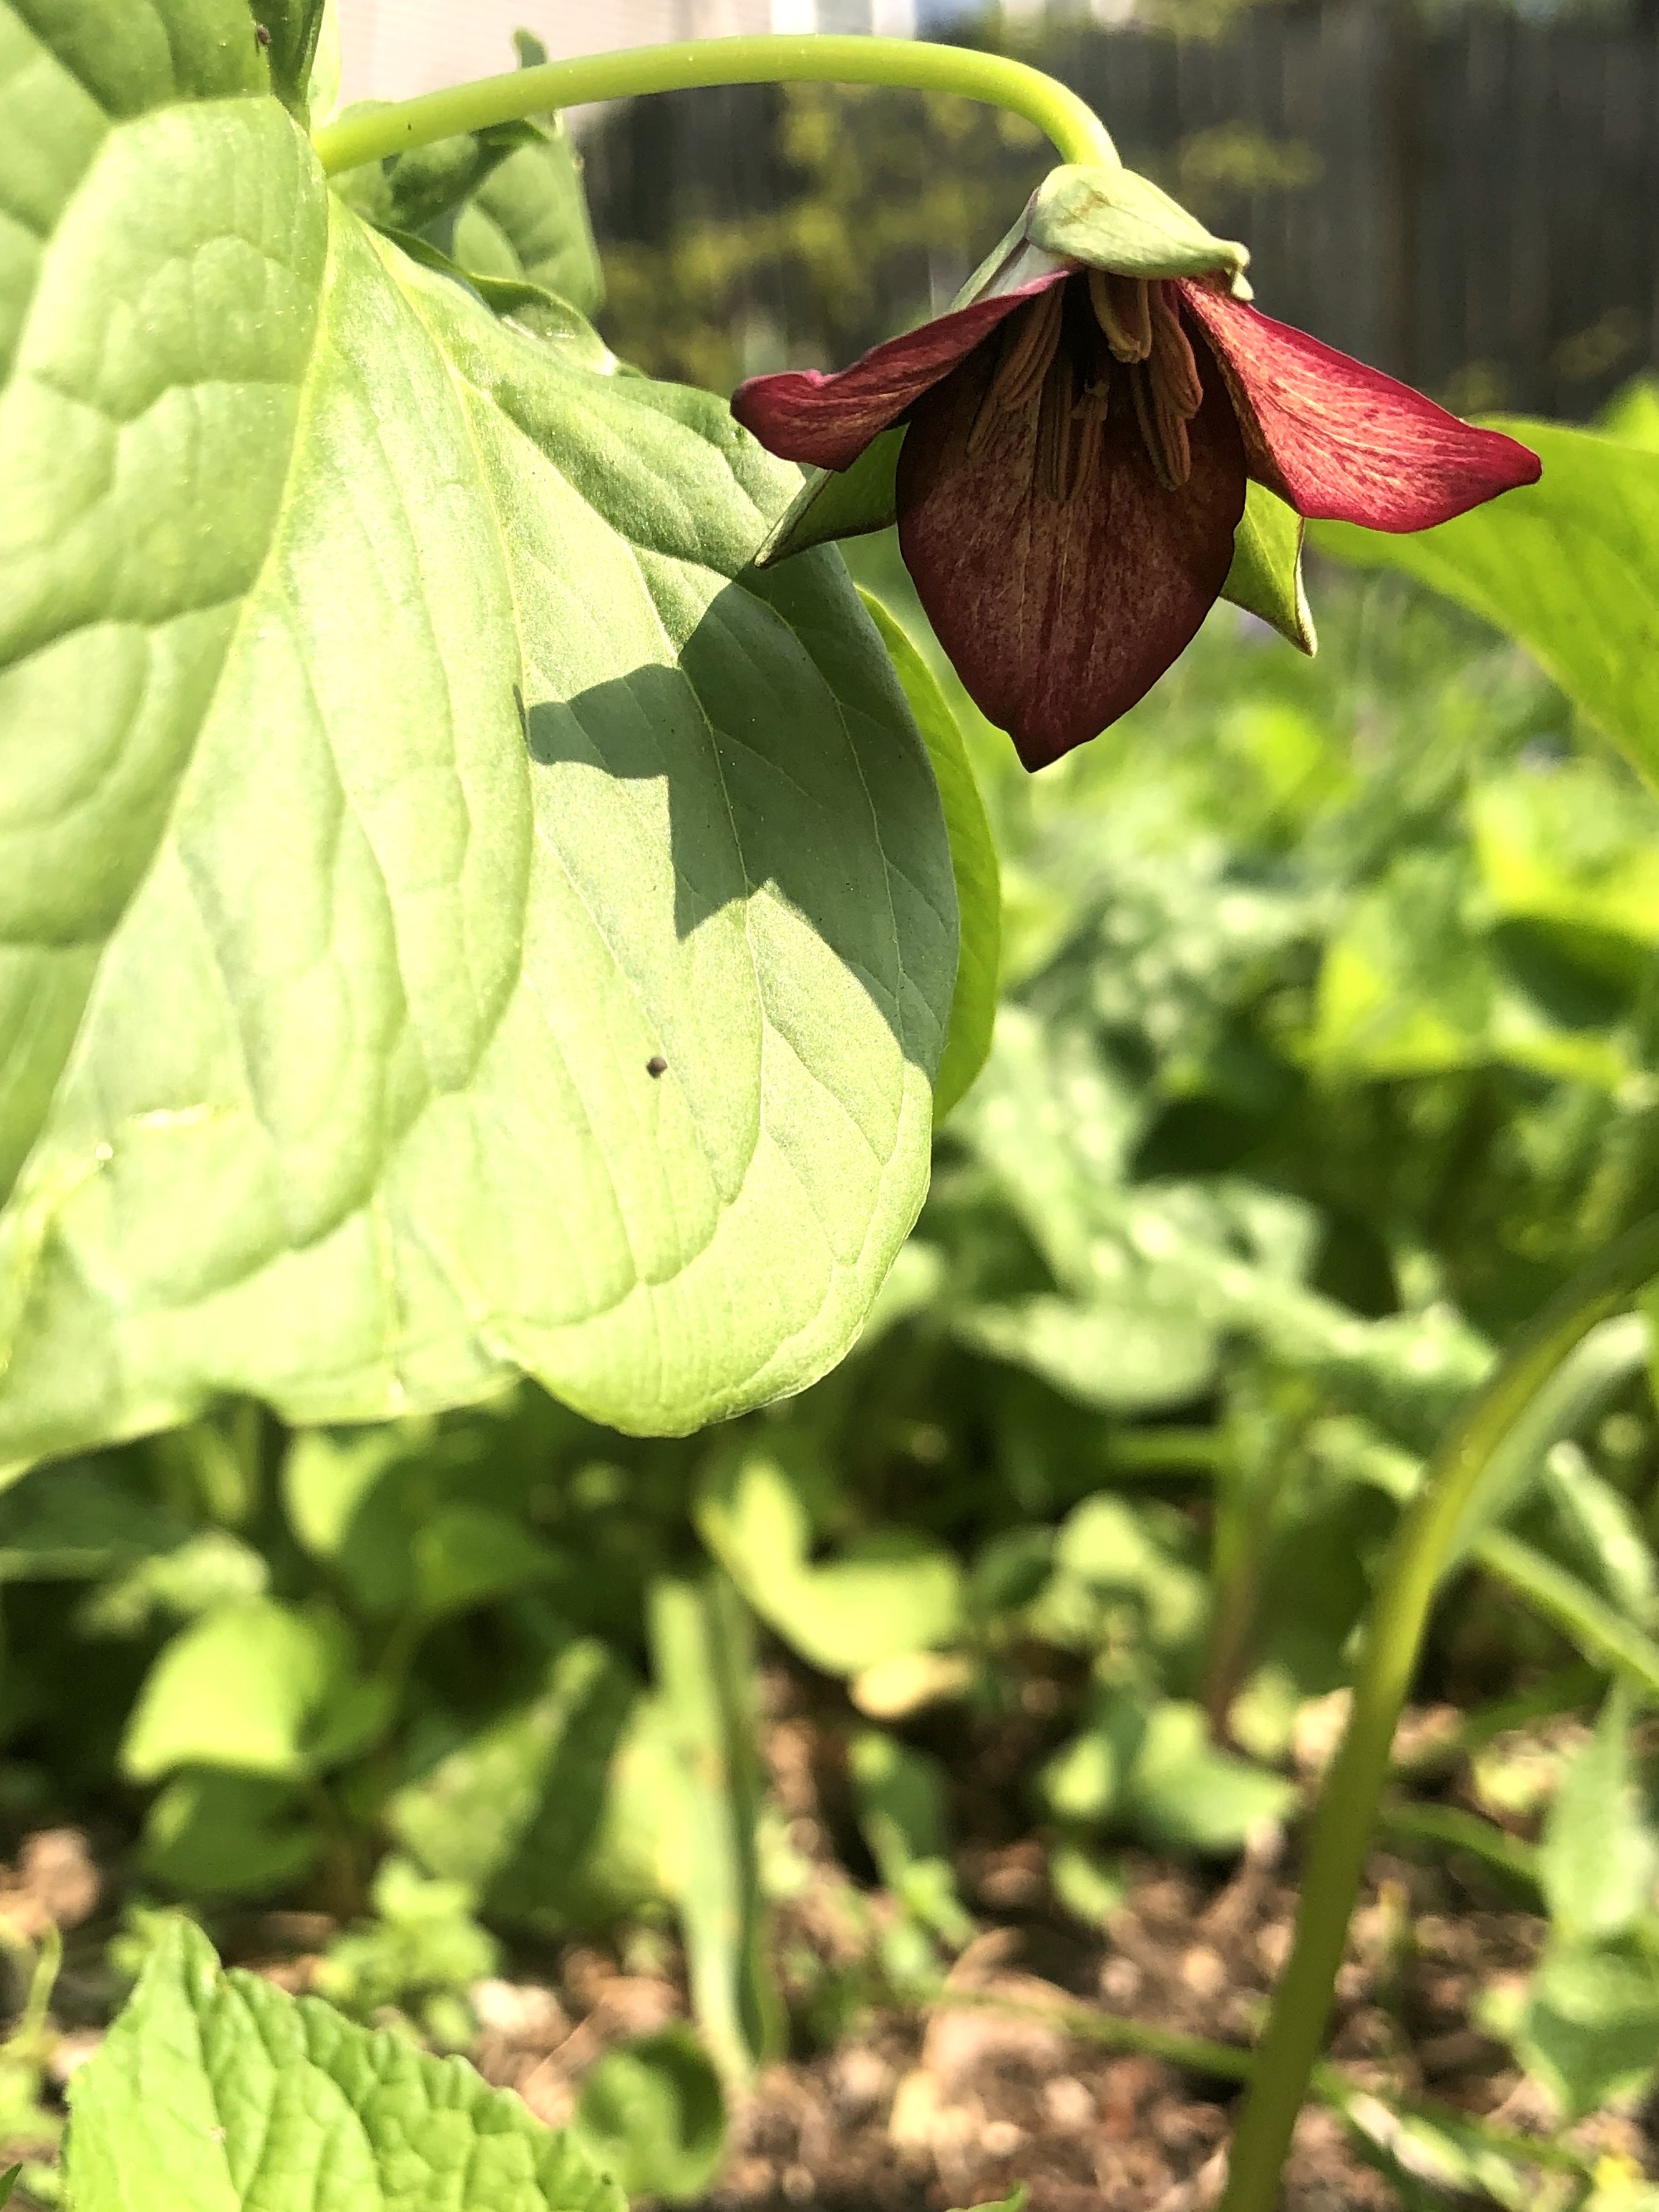 Red Trillium in Nakoma garden in Madison, Wisconsin on May 12, 2022.